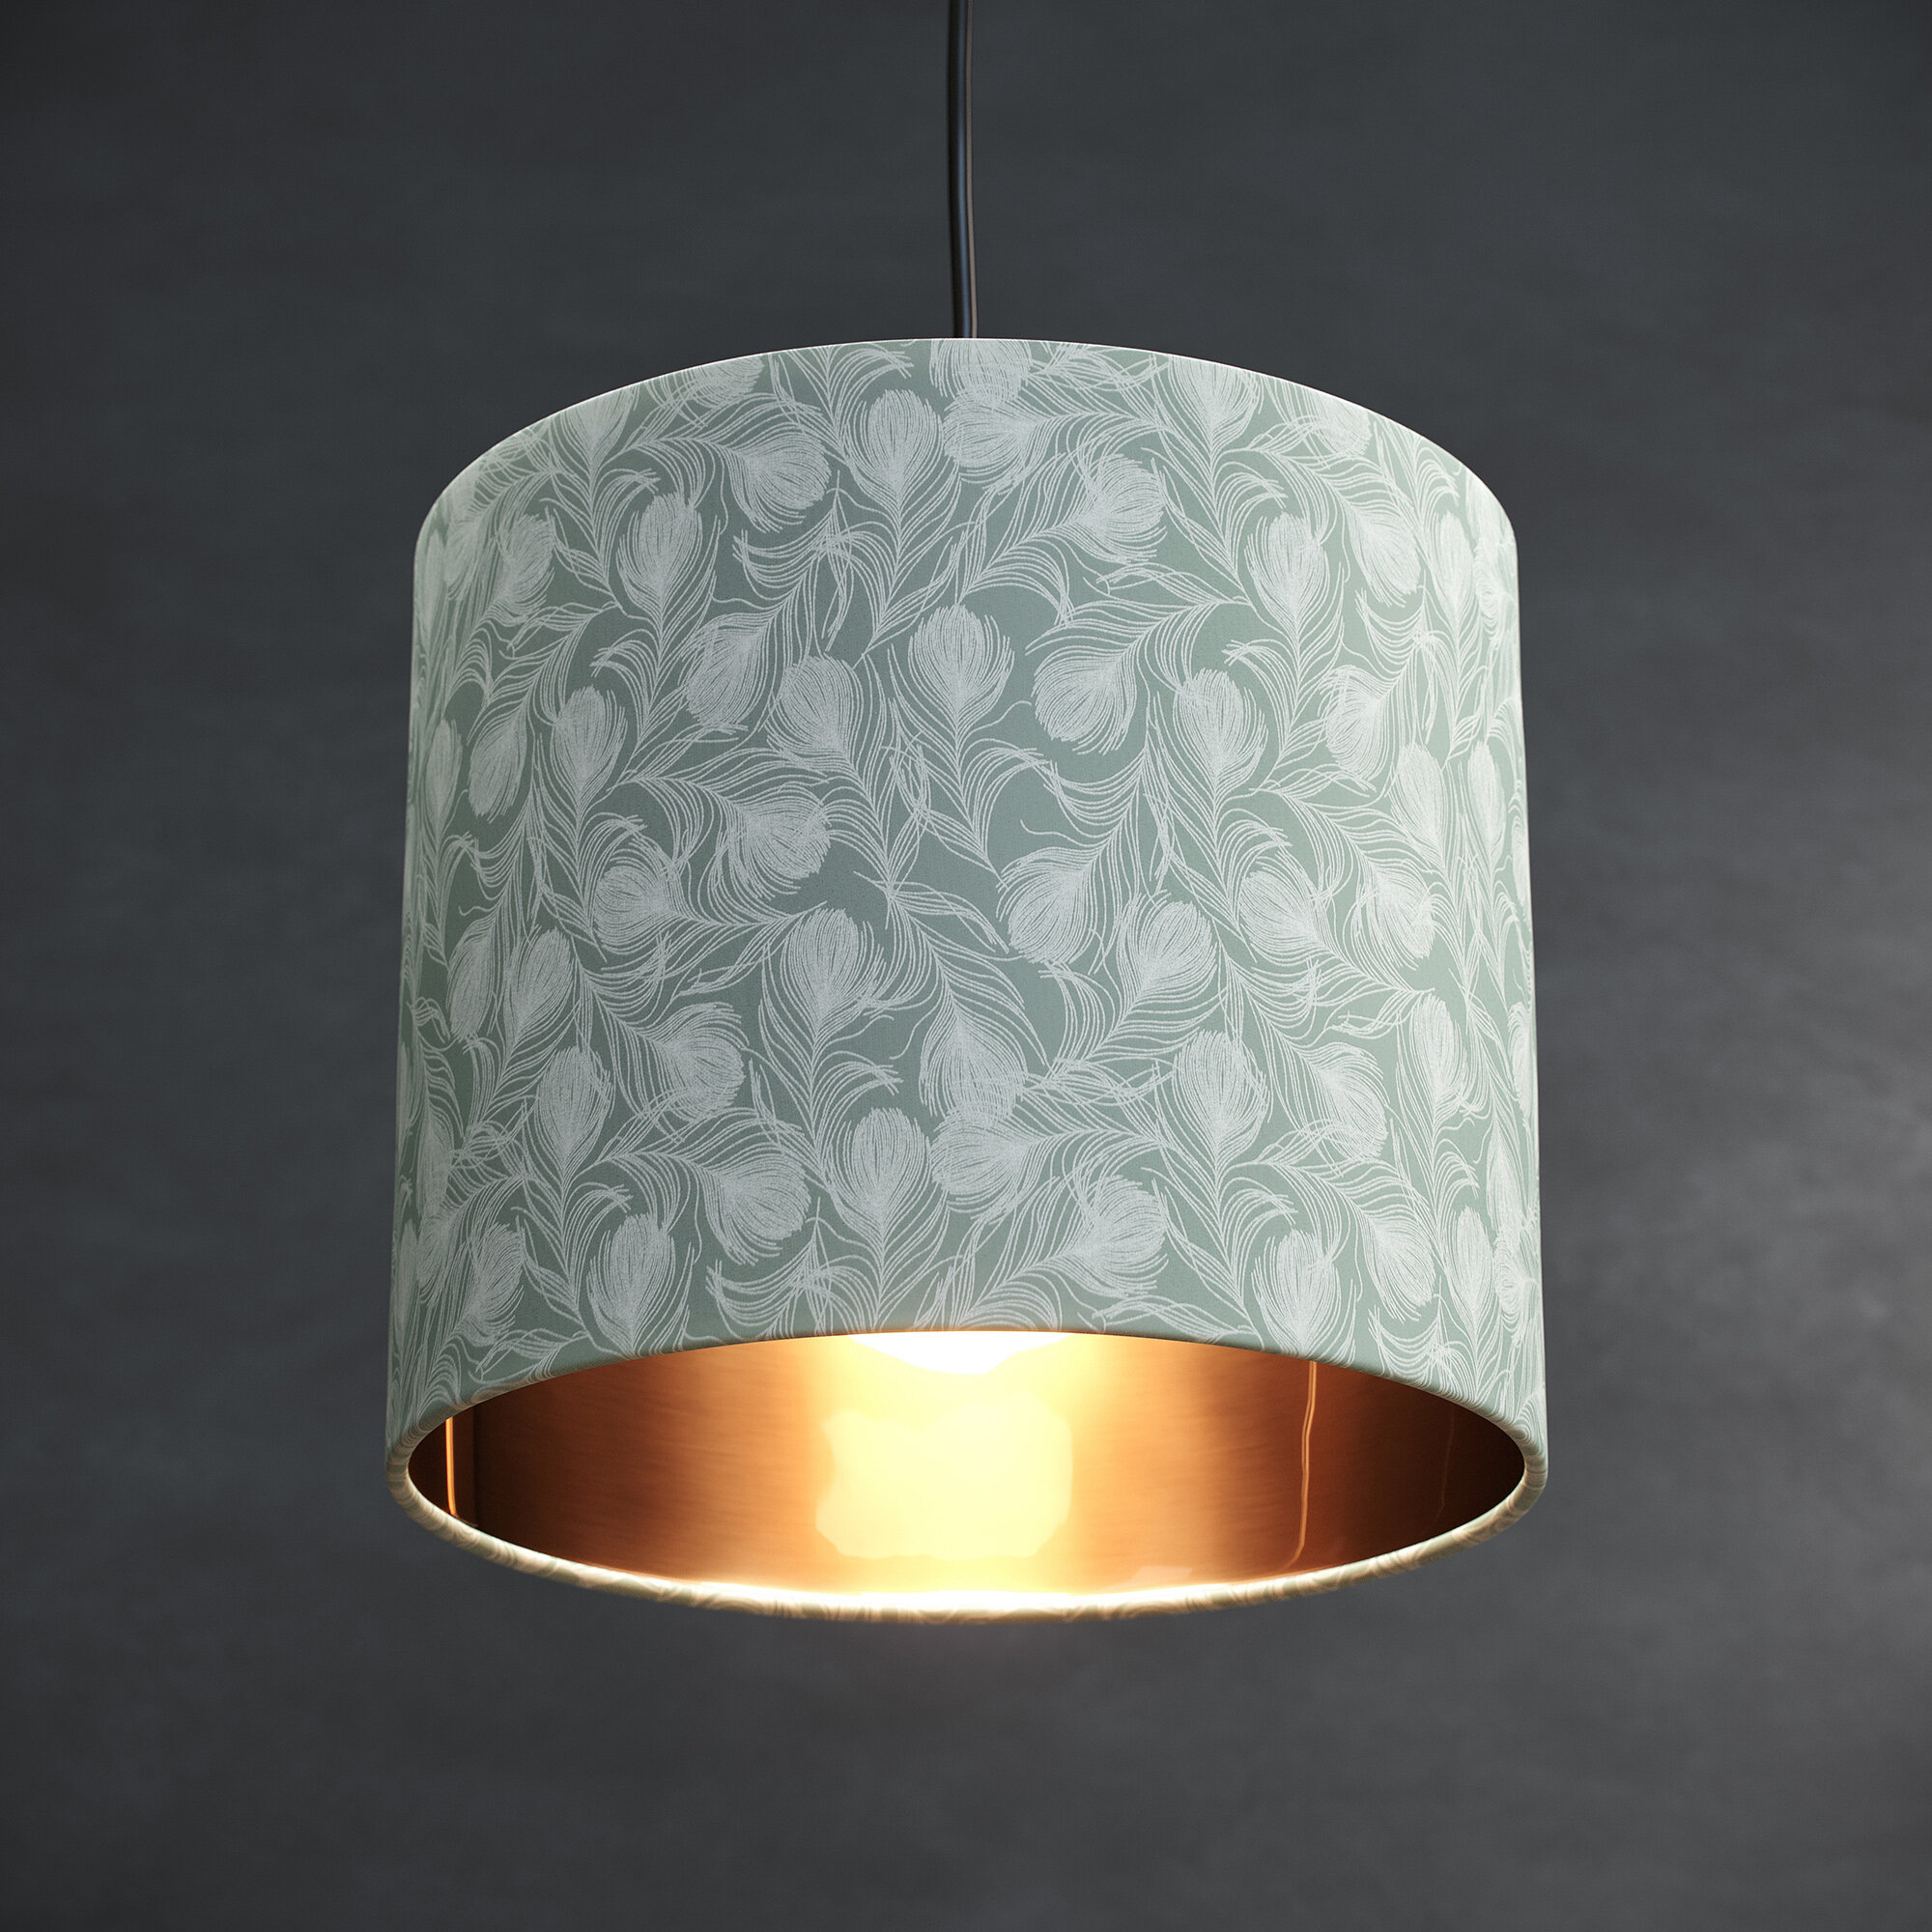 ACD_Lampshade_Copper_Feathers_Green2.jpg